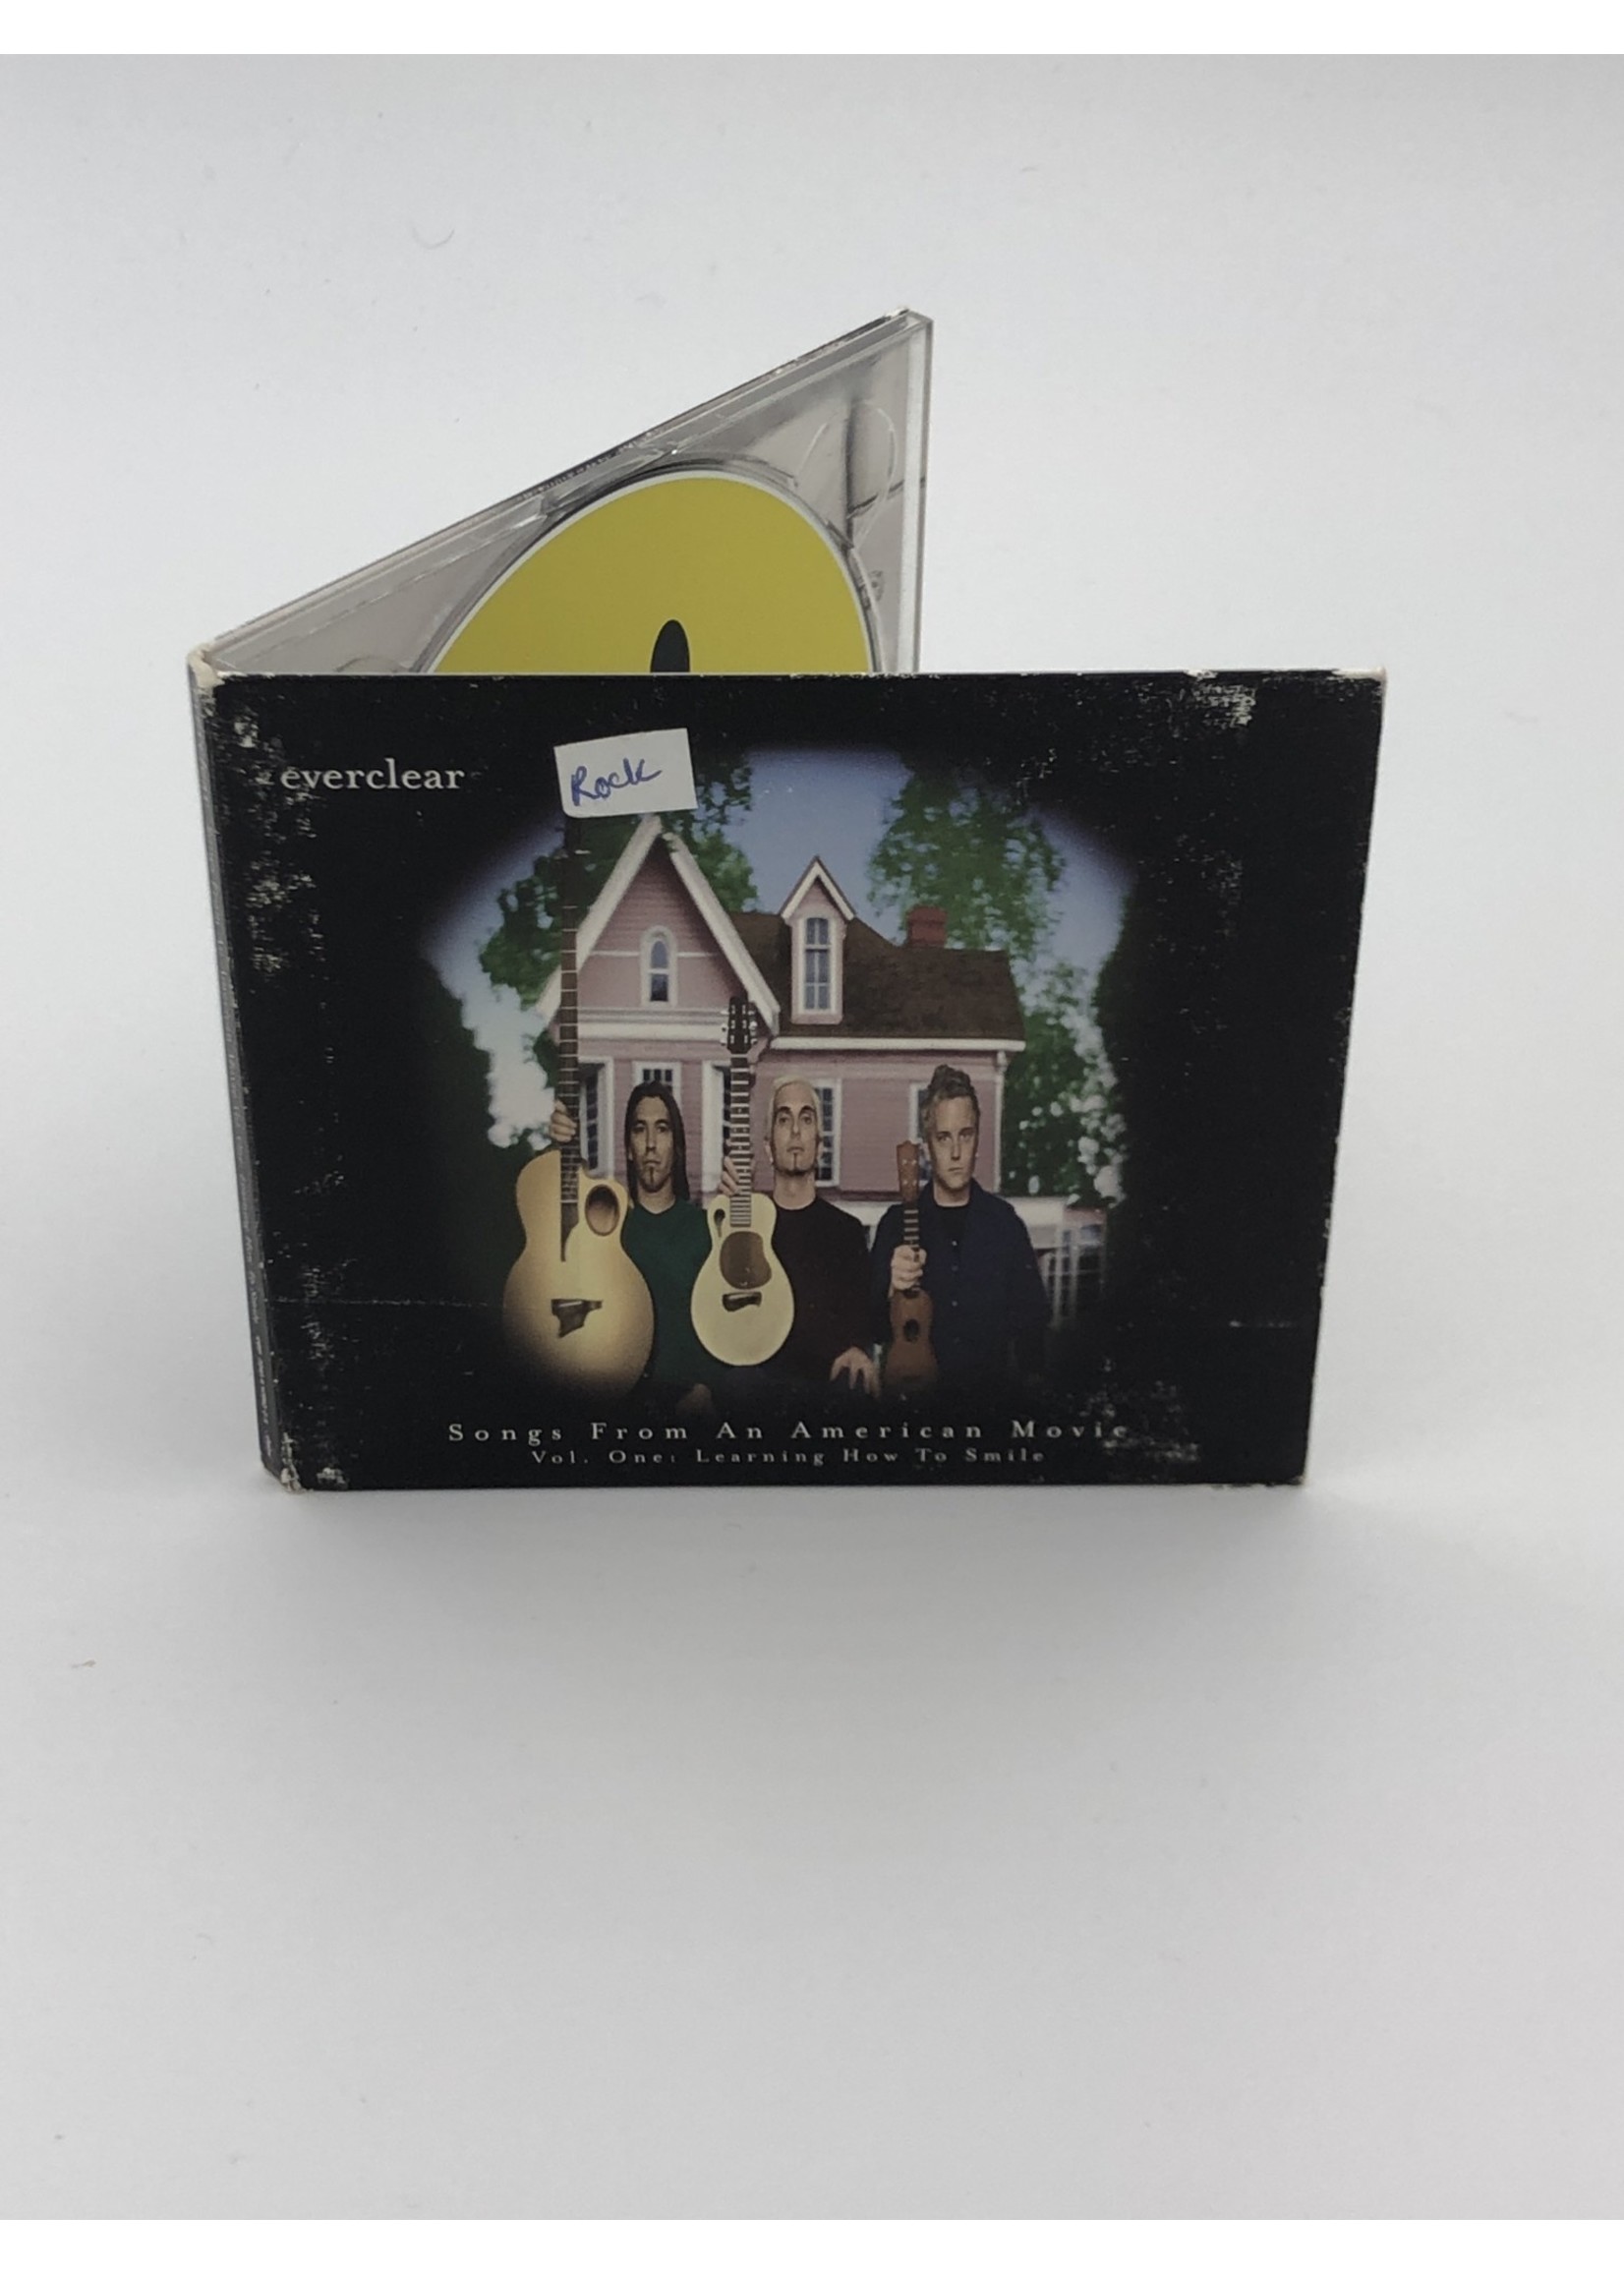 CD Everclear: Songs From an American Movie: Vol One: Learning how to Smile CD